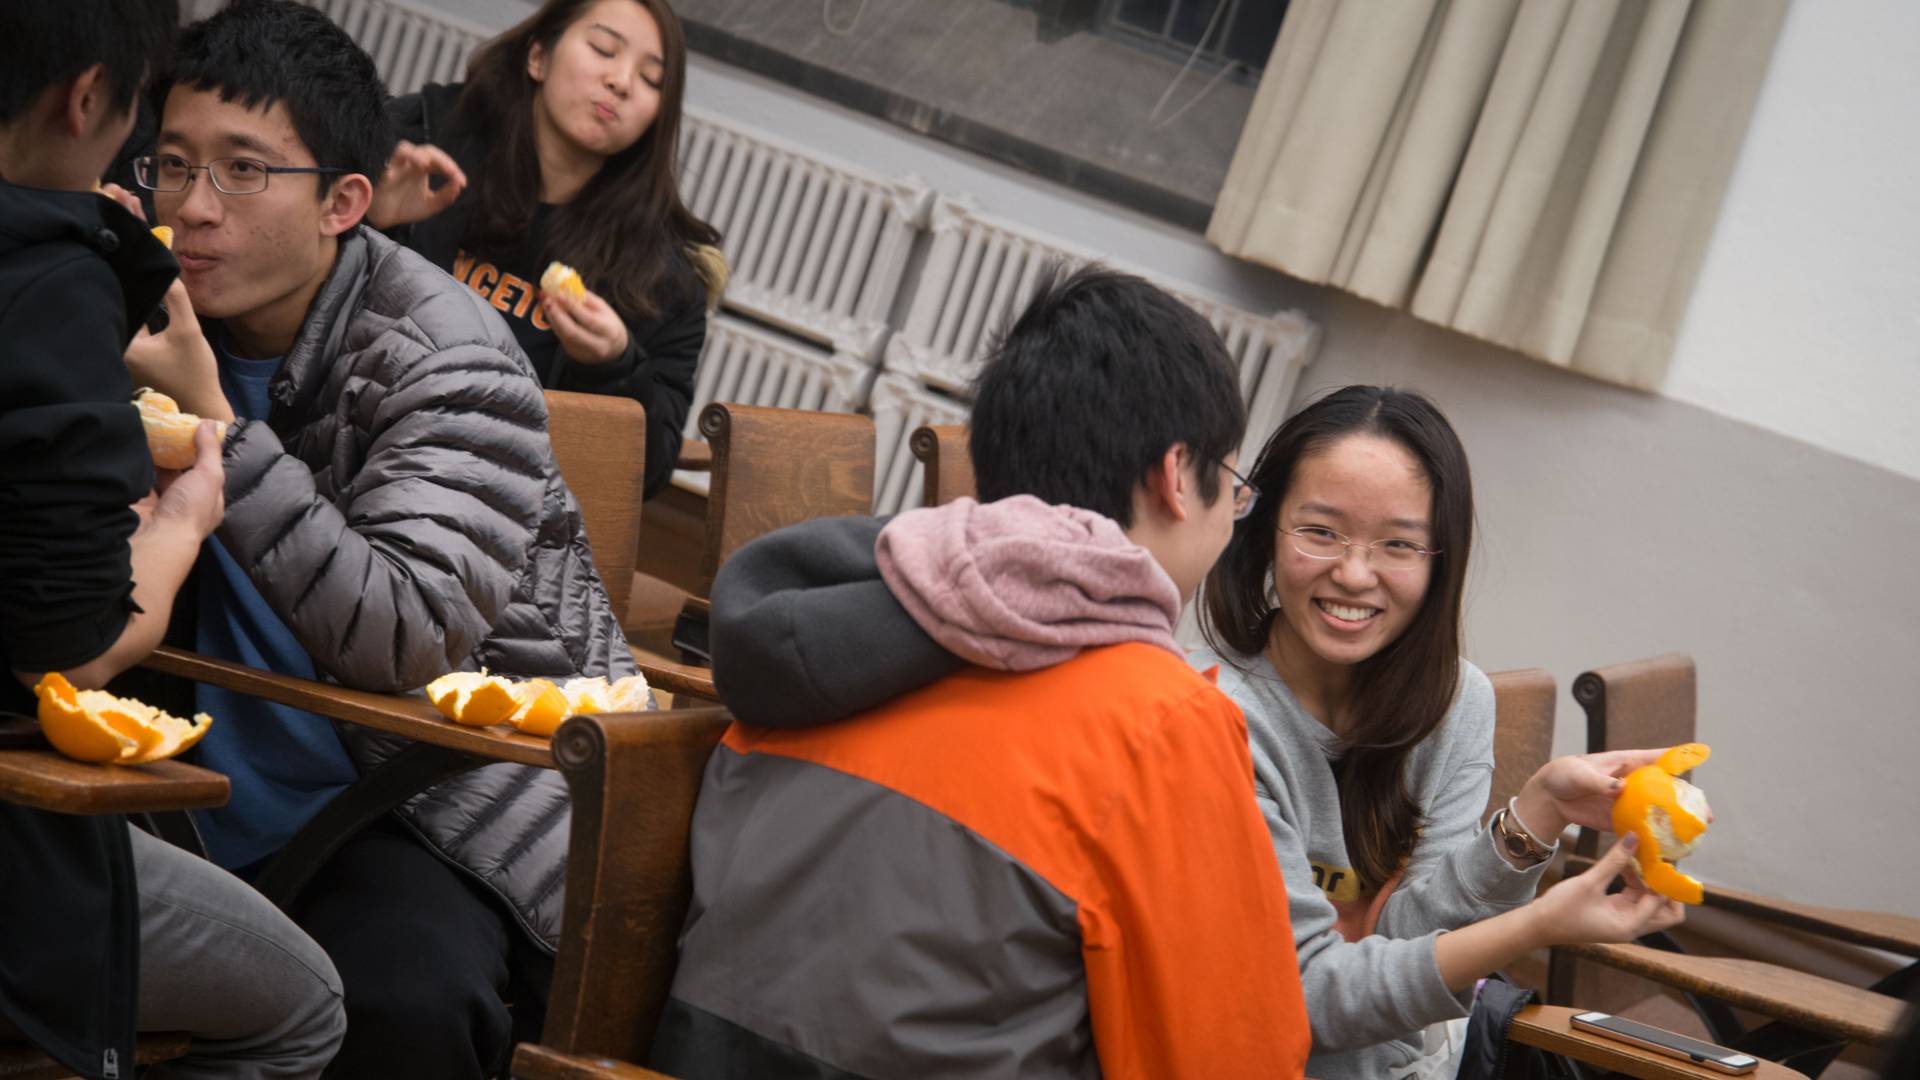 Students eating and peeling oranges